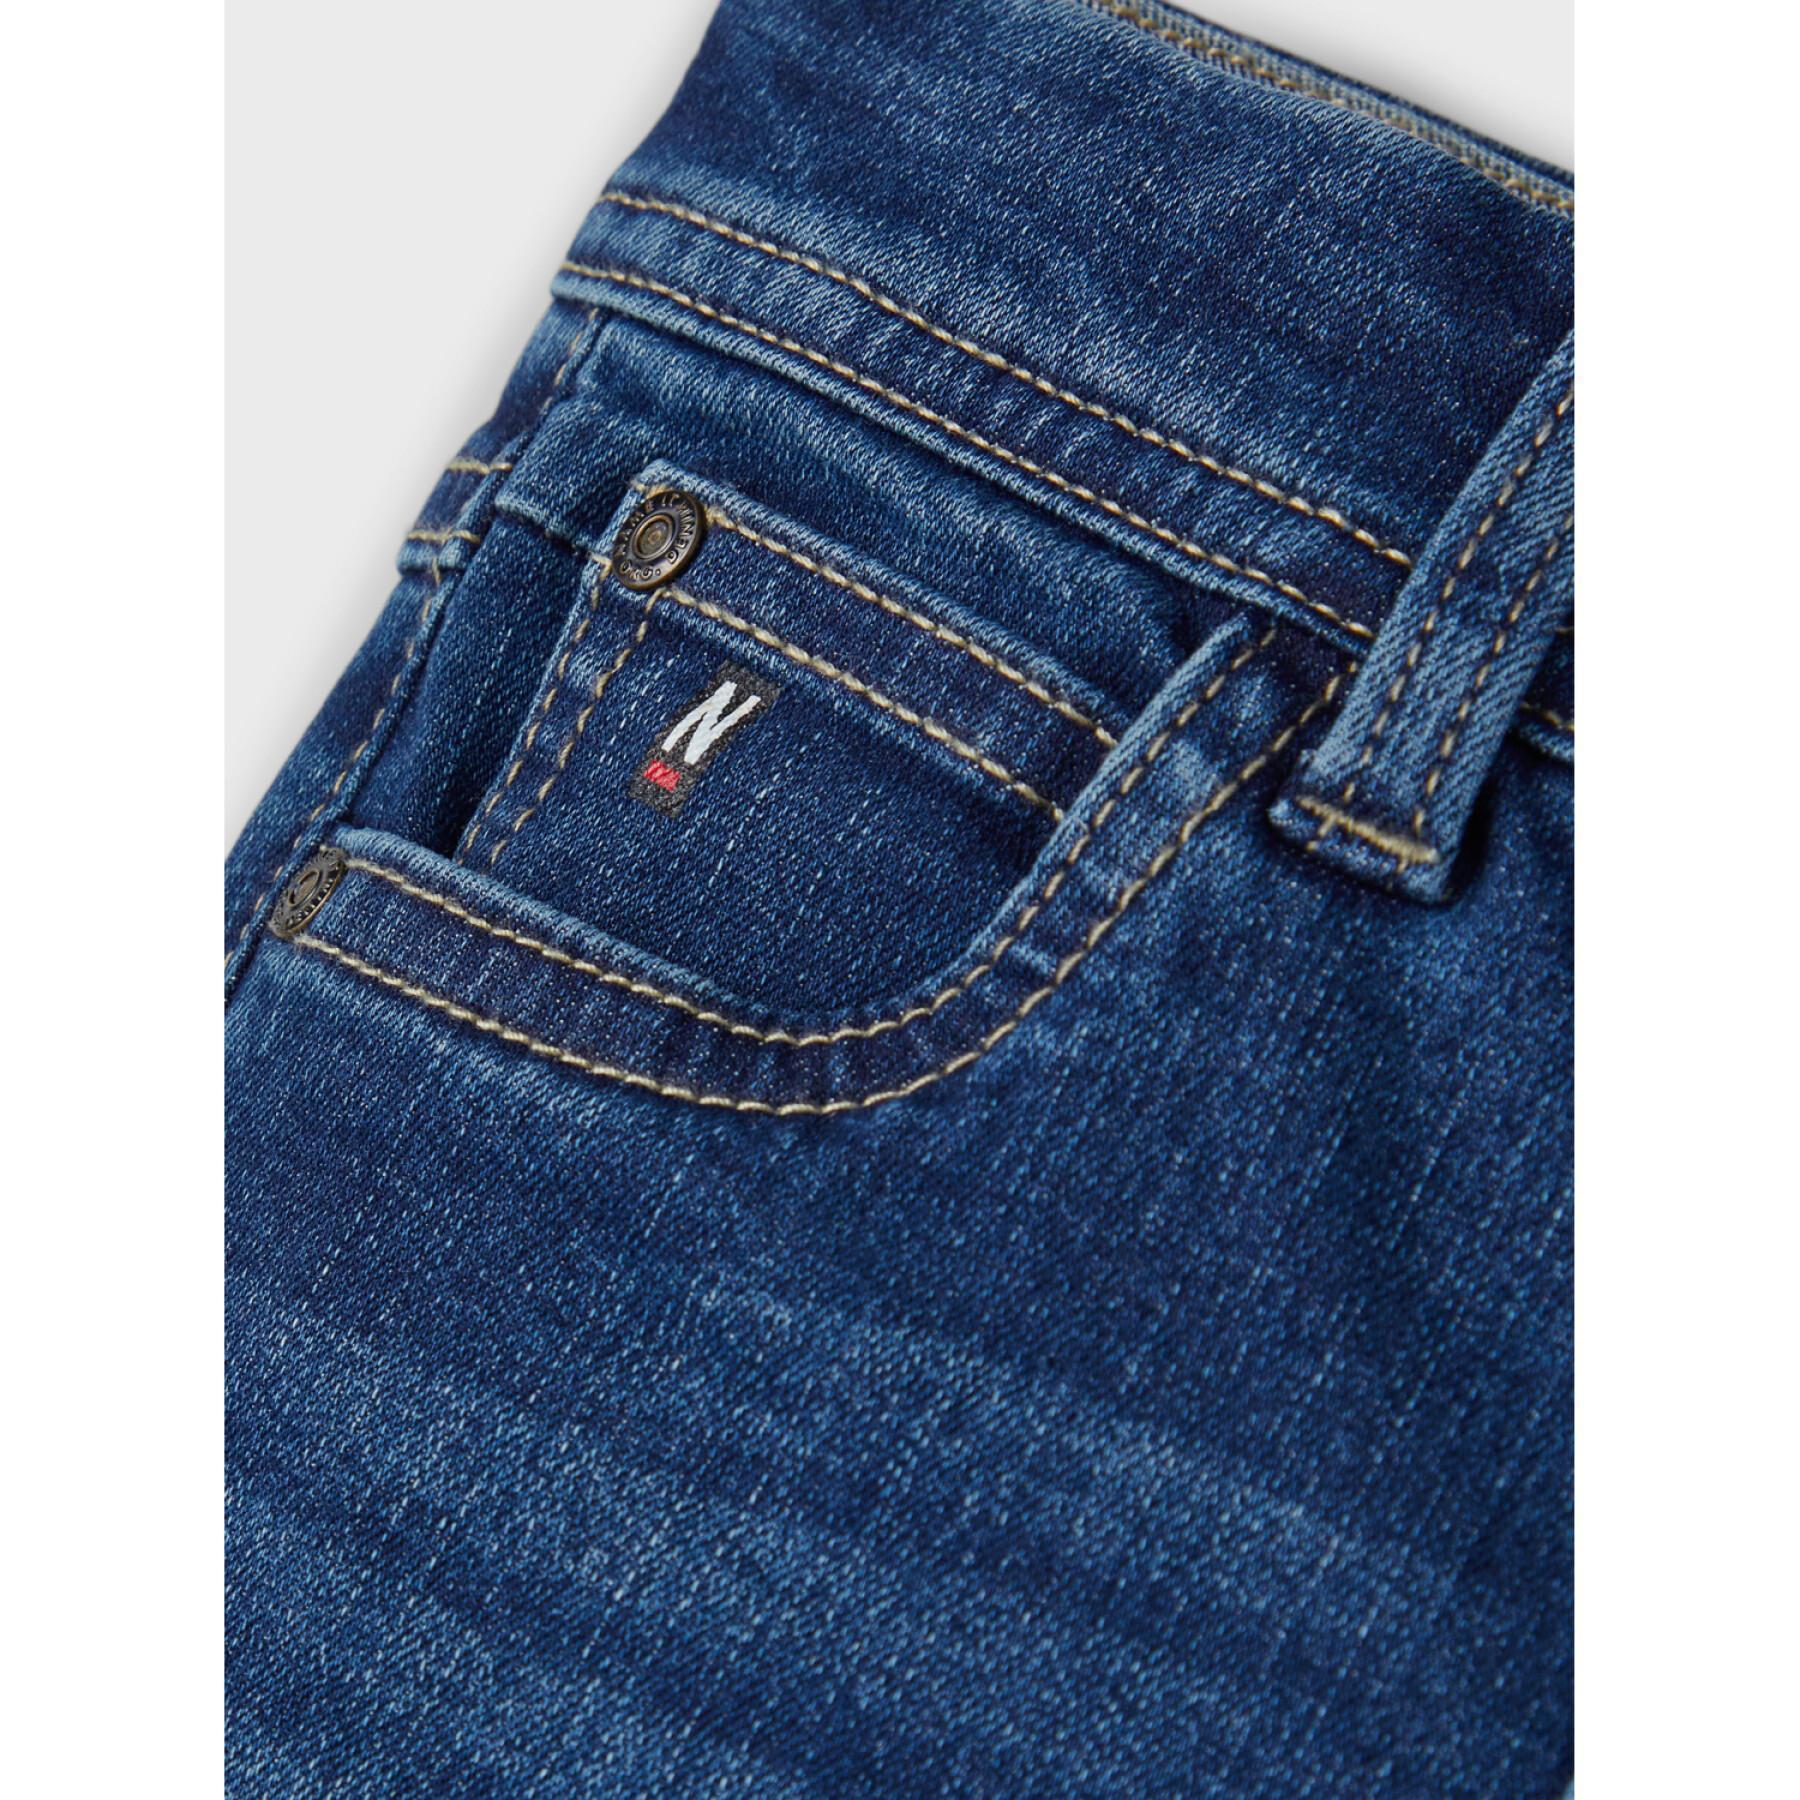 Children's jeans Name it Theo Taul 3618